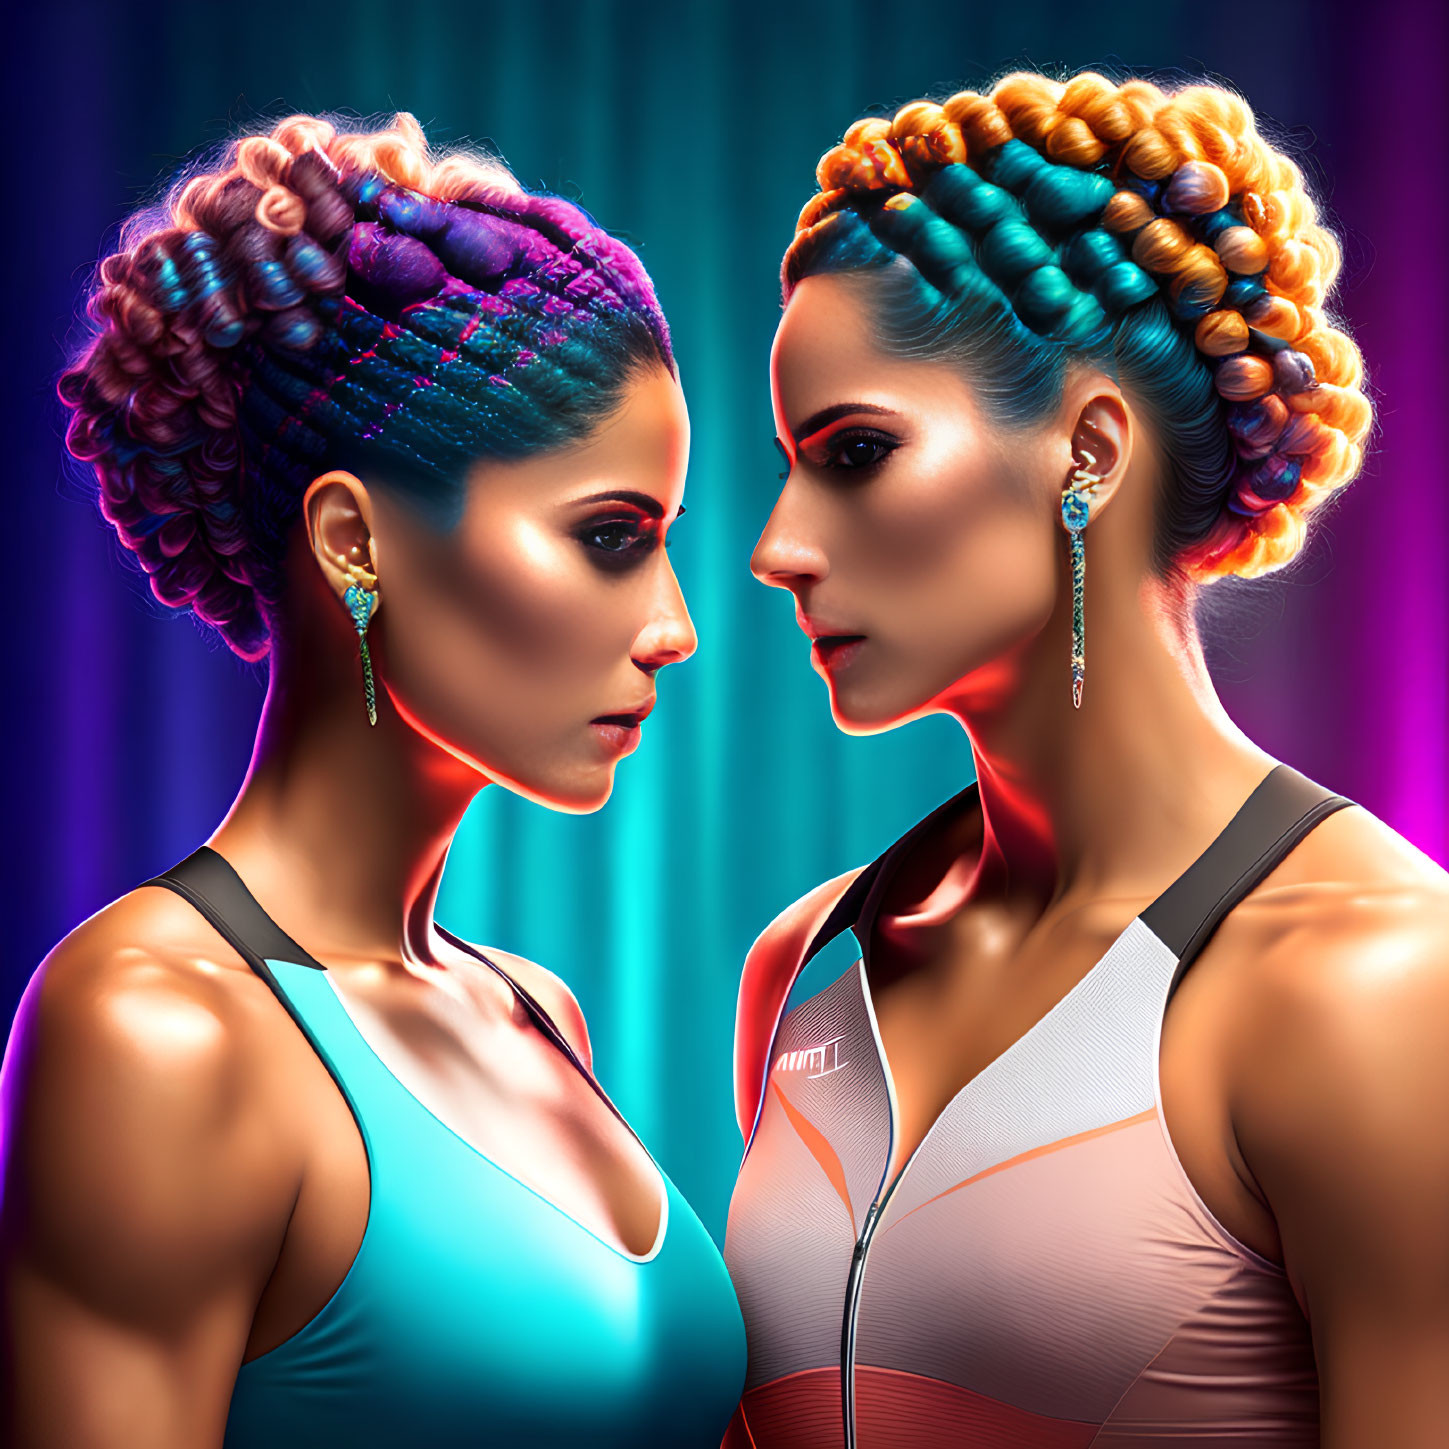 Two Women with Braided Hair in Colorful Backdrop and Athletic Wear